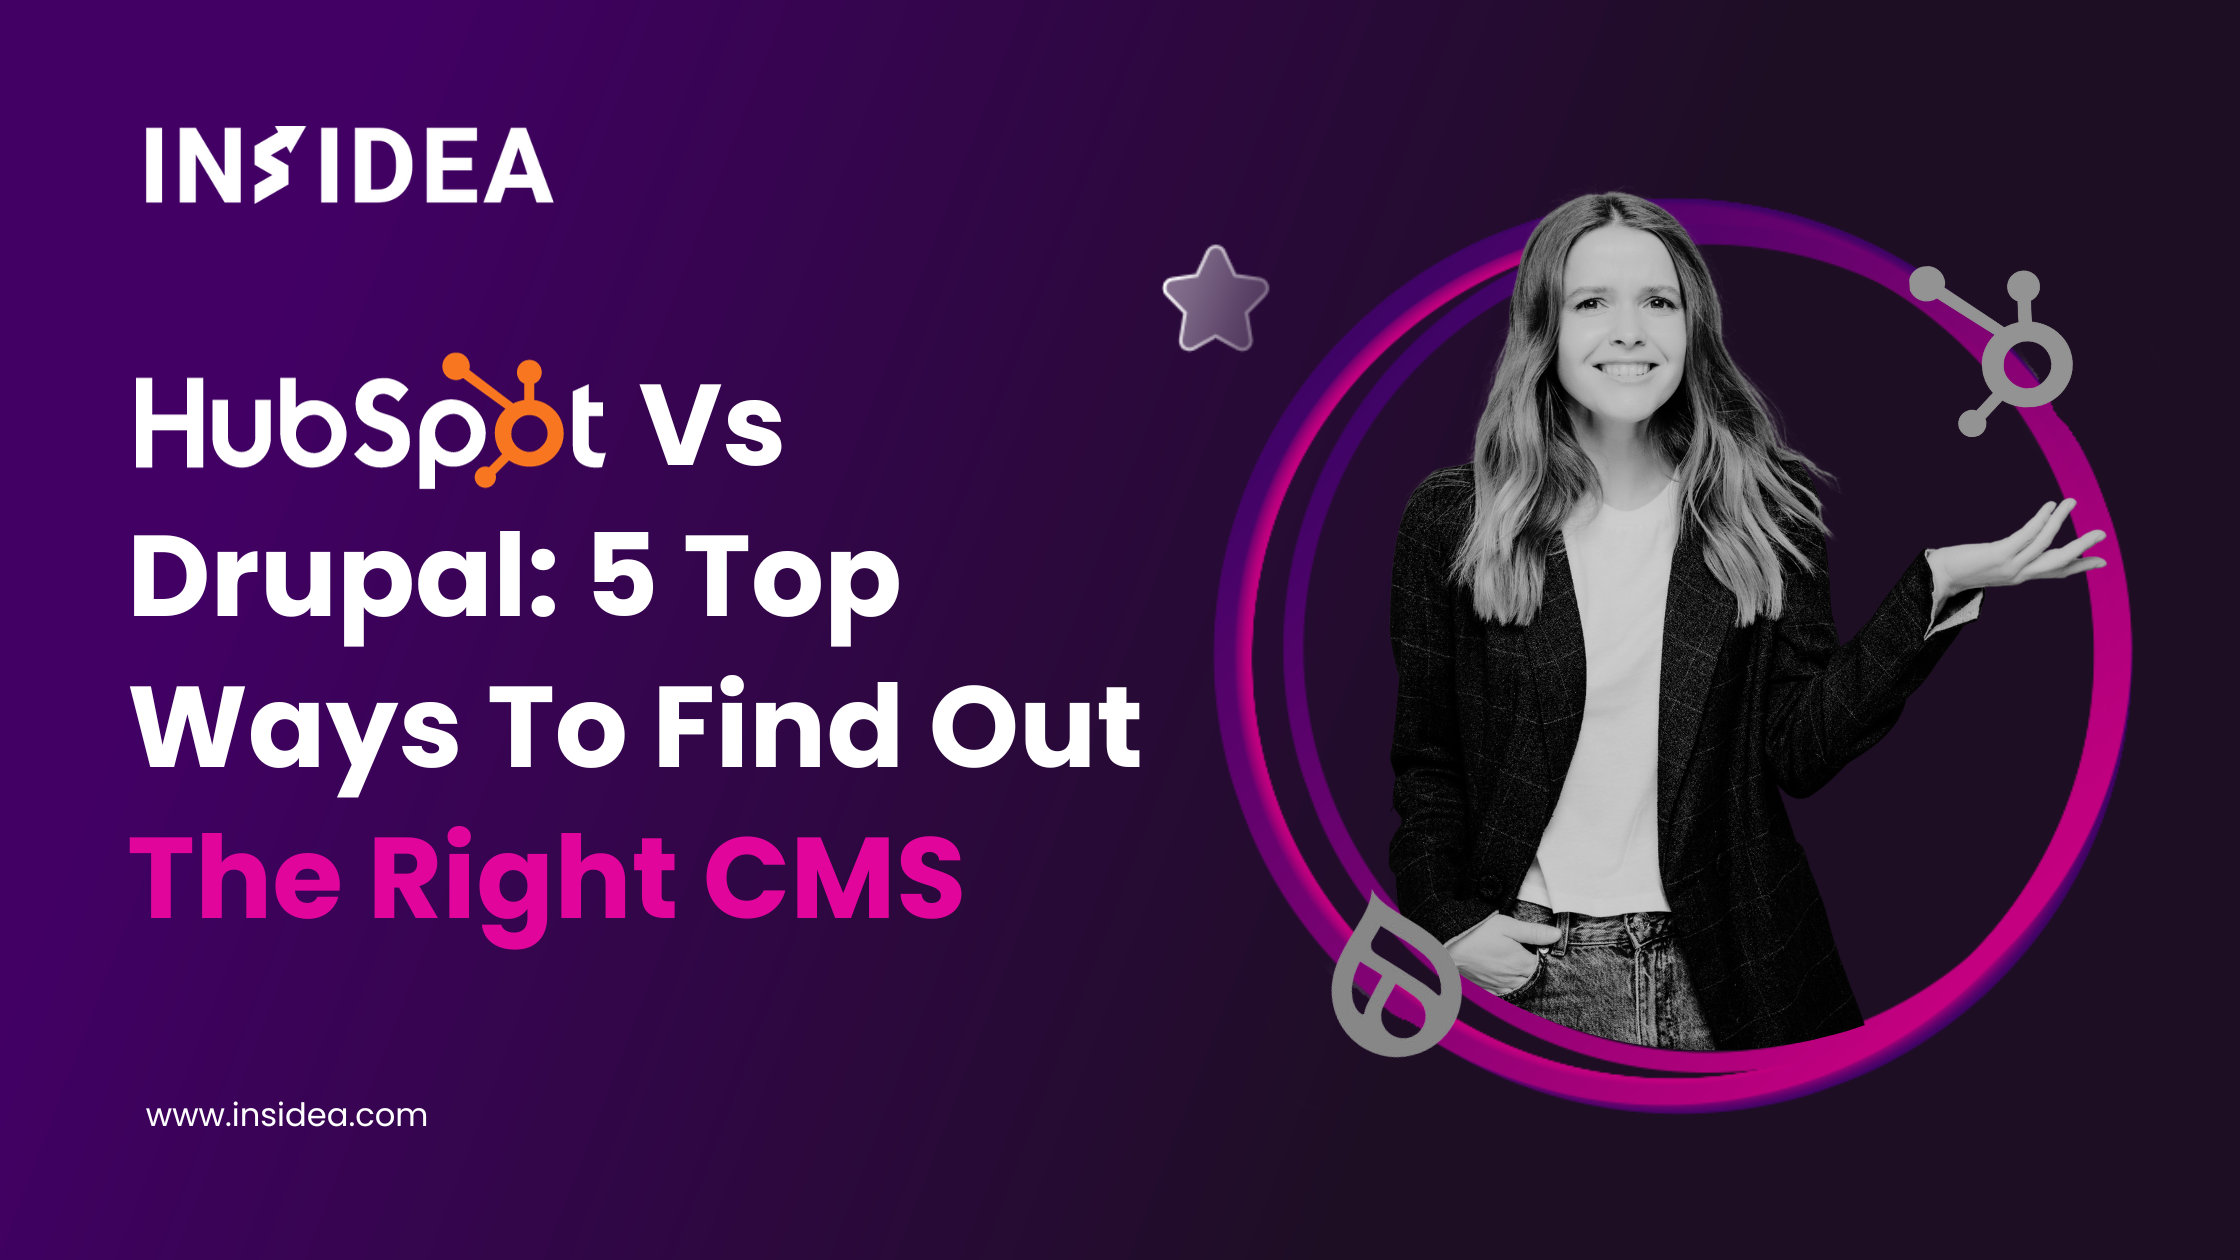 HubSpot Vs Drupal_ 5 Top Ways To Find Out The Right CMS